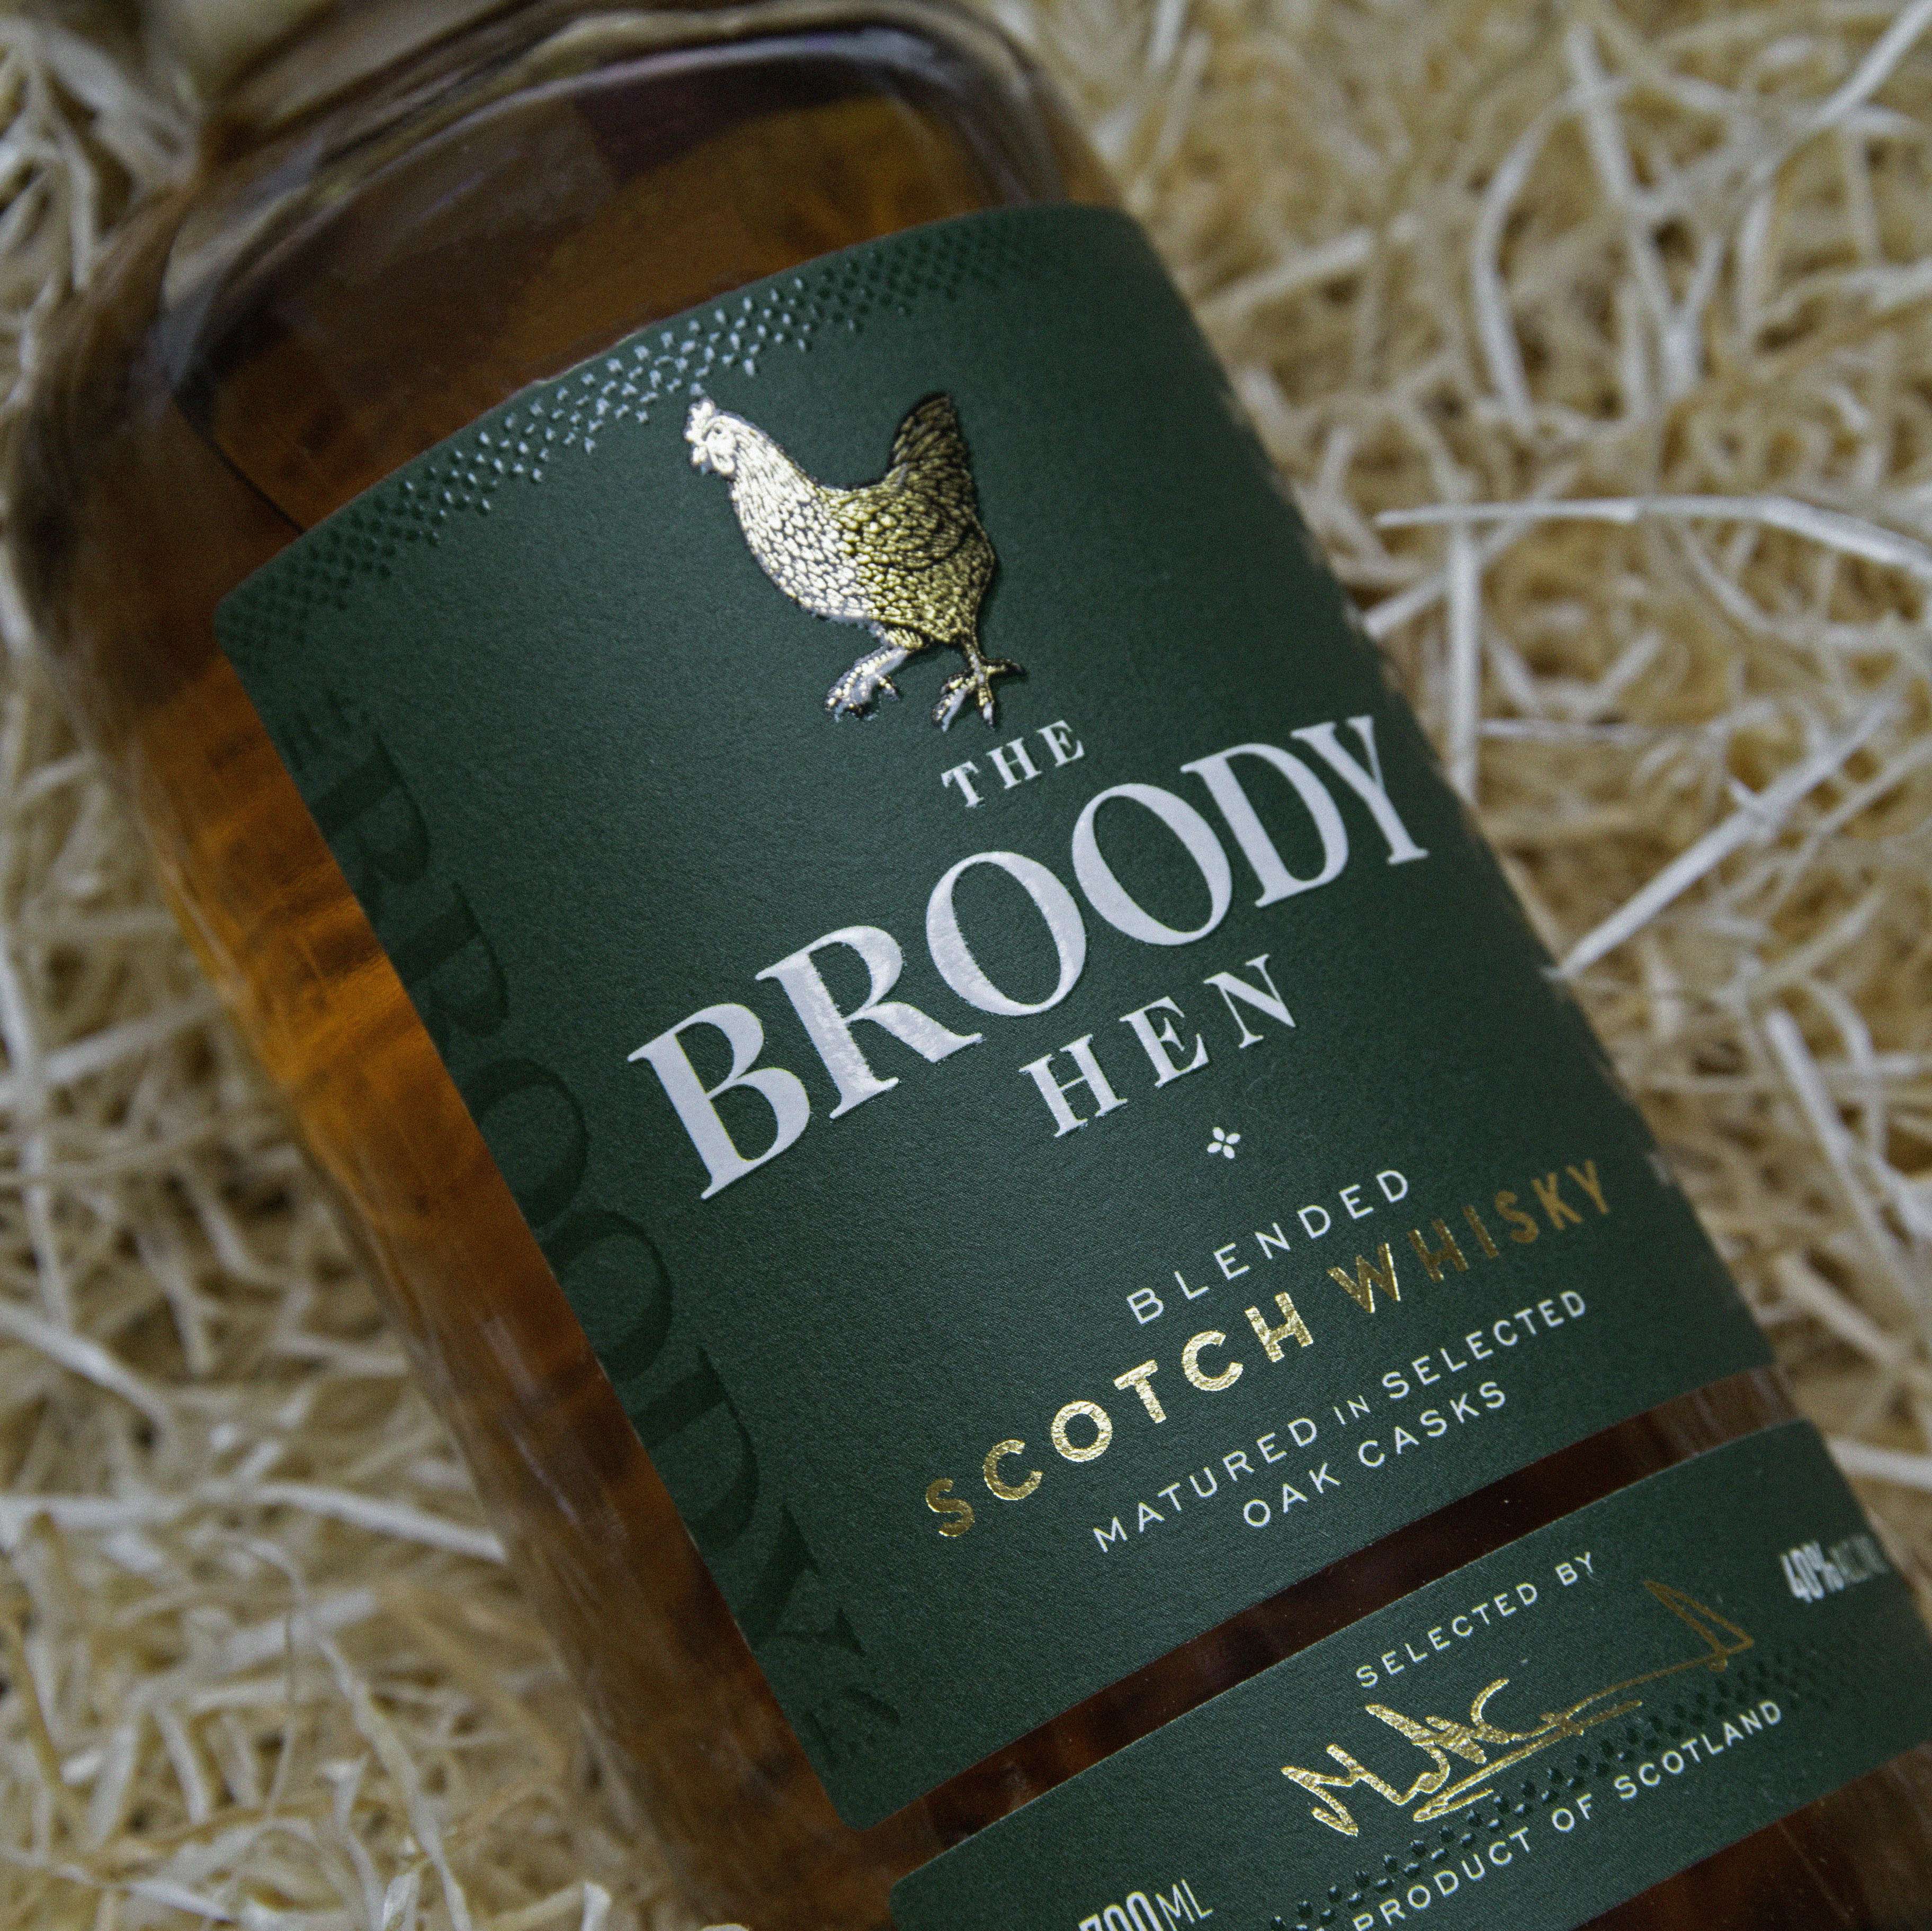 The Broody Hen Blended Scotch Whisky Whisky